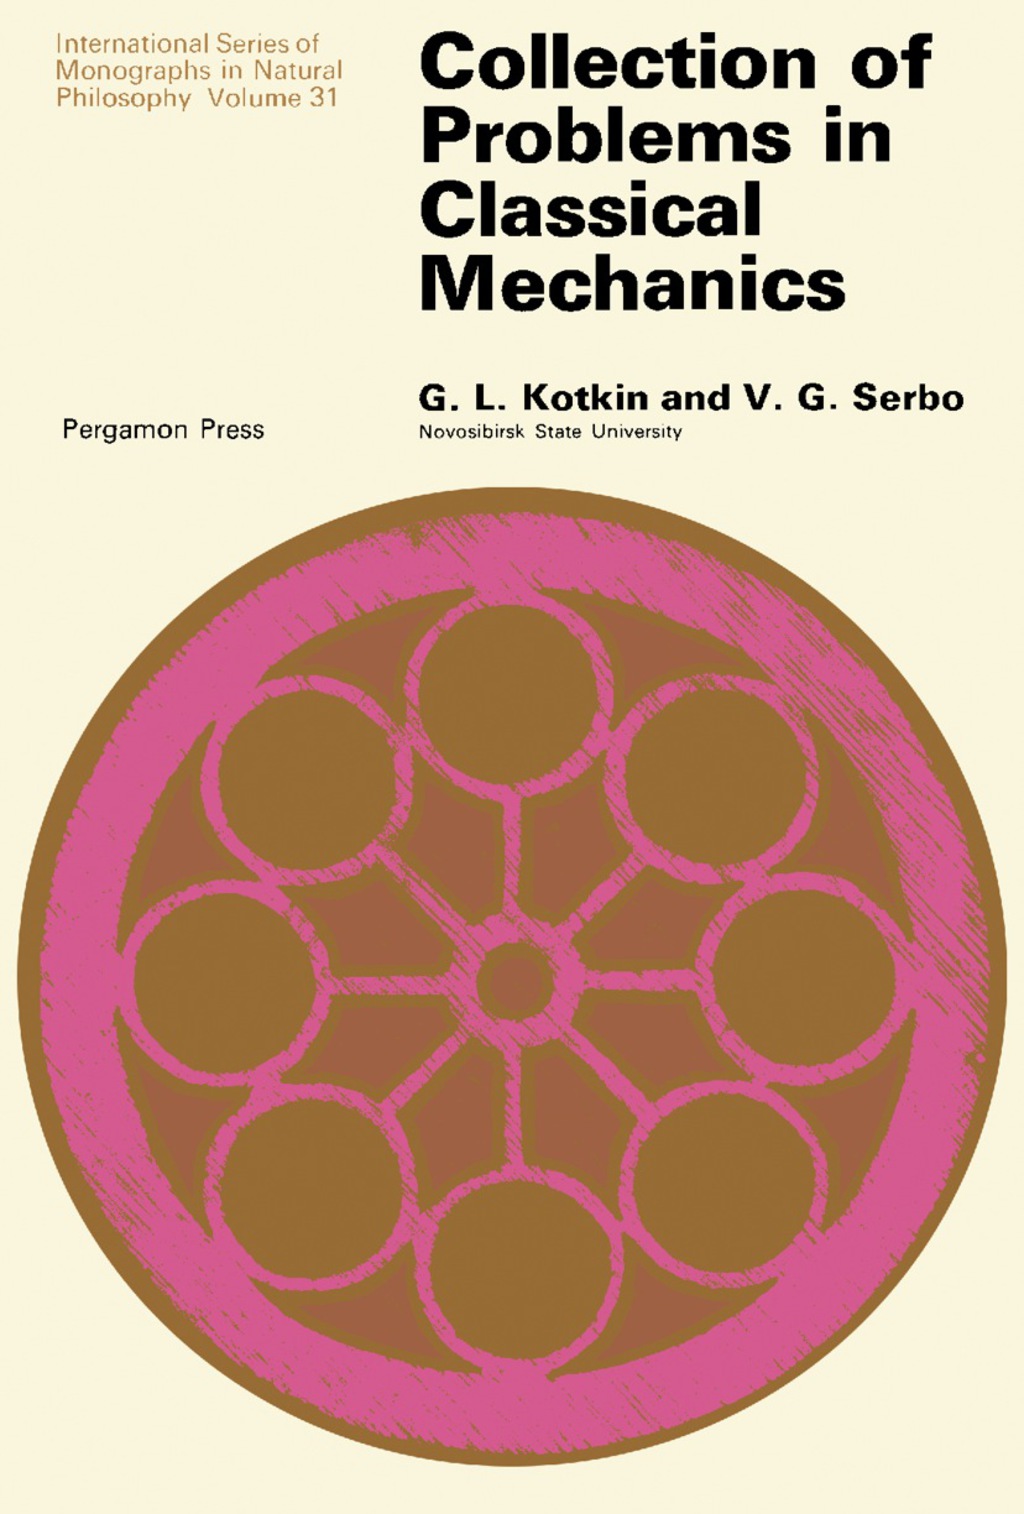 Collection of Problems in Classical Mechanics (eBook) - G. L. Kotkin; V. G. Serbo,